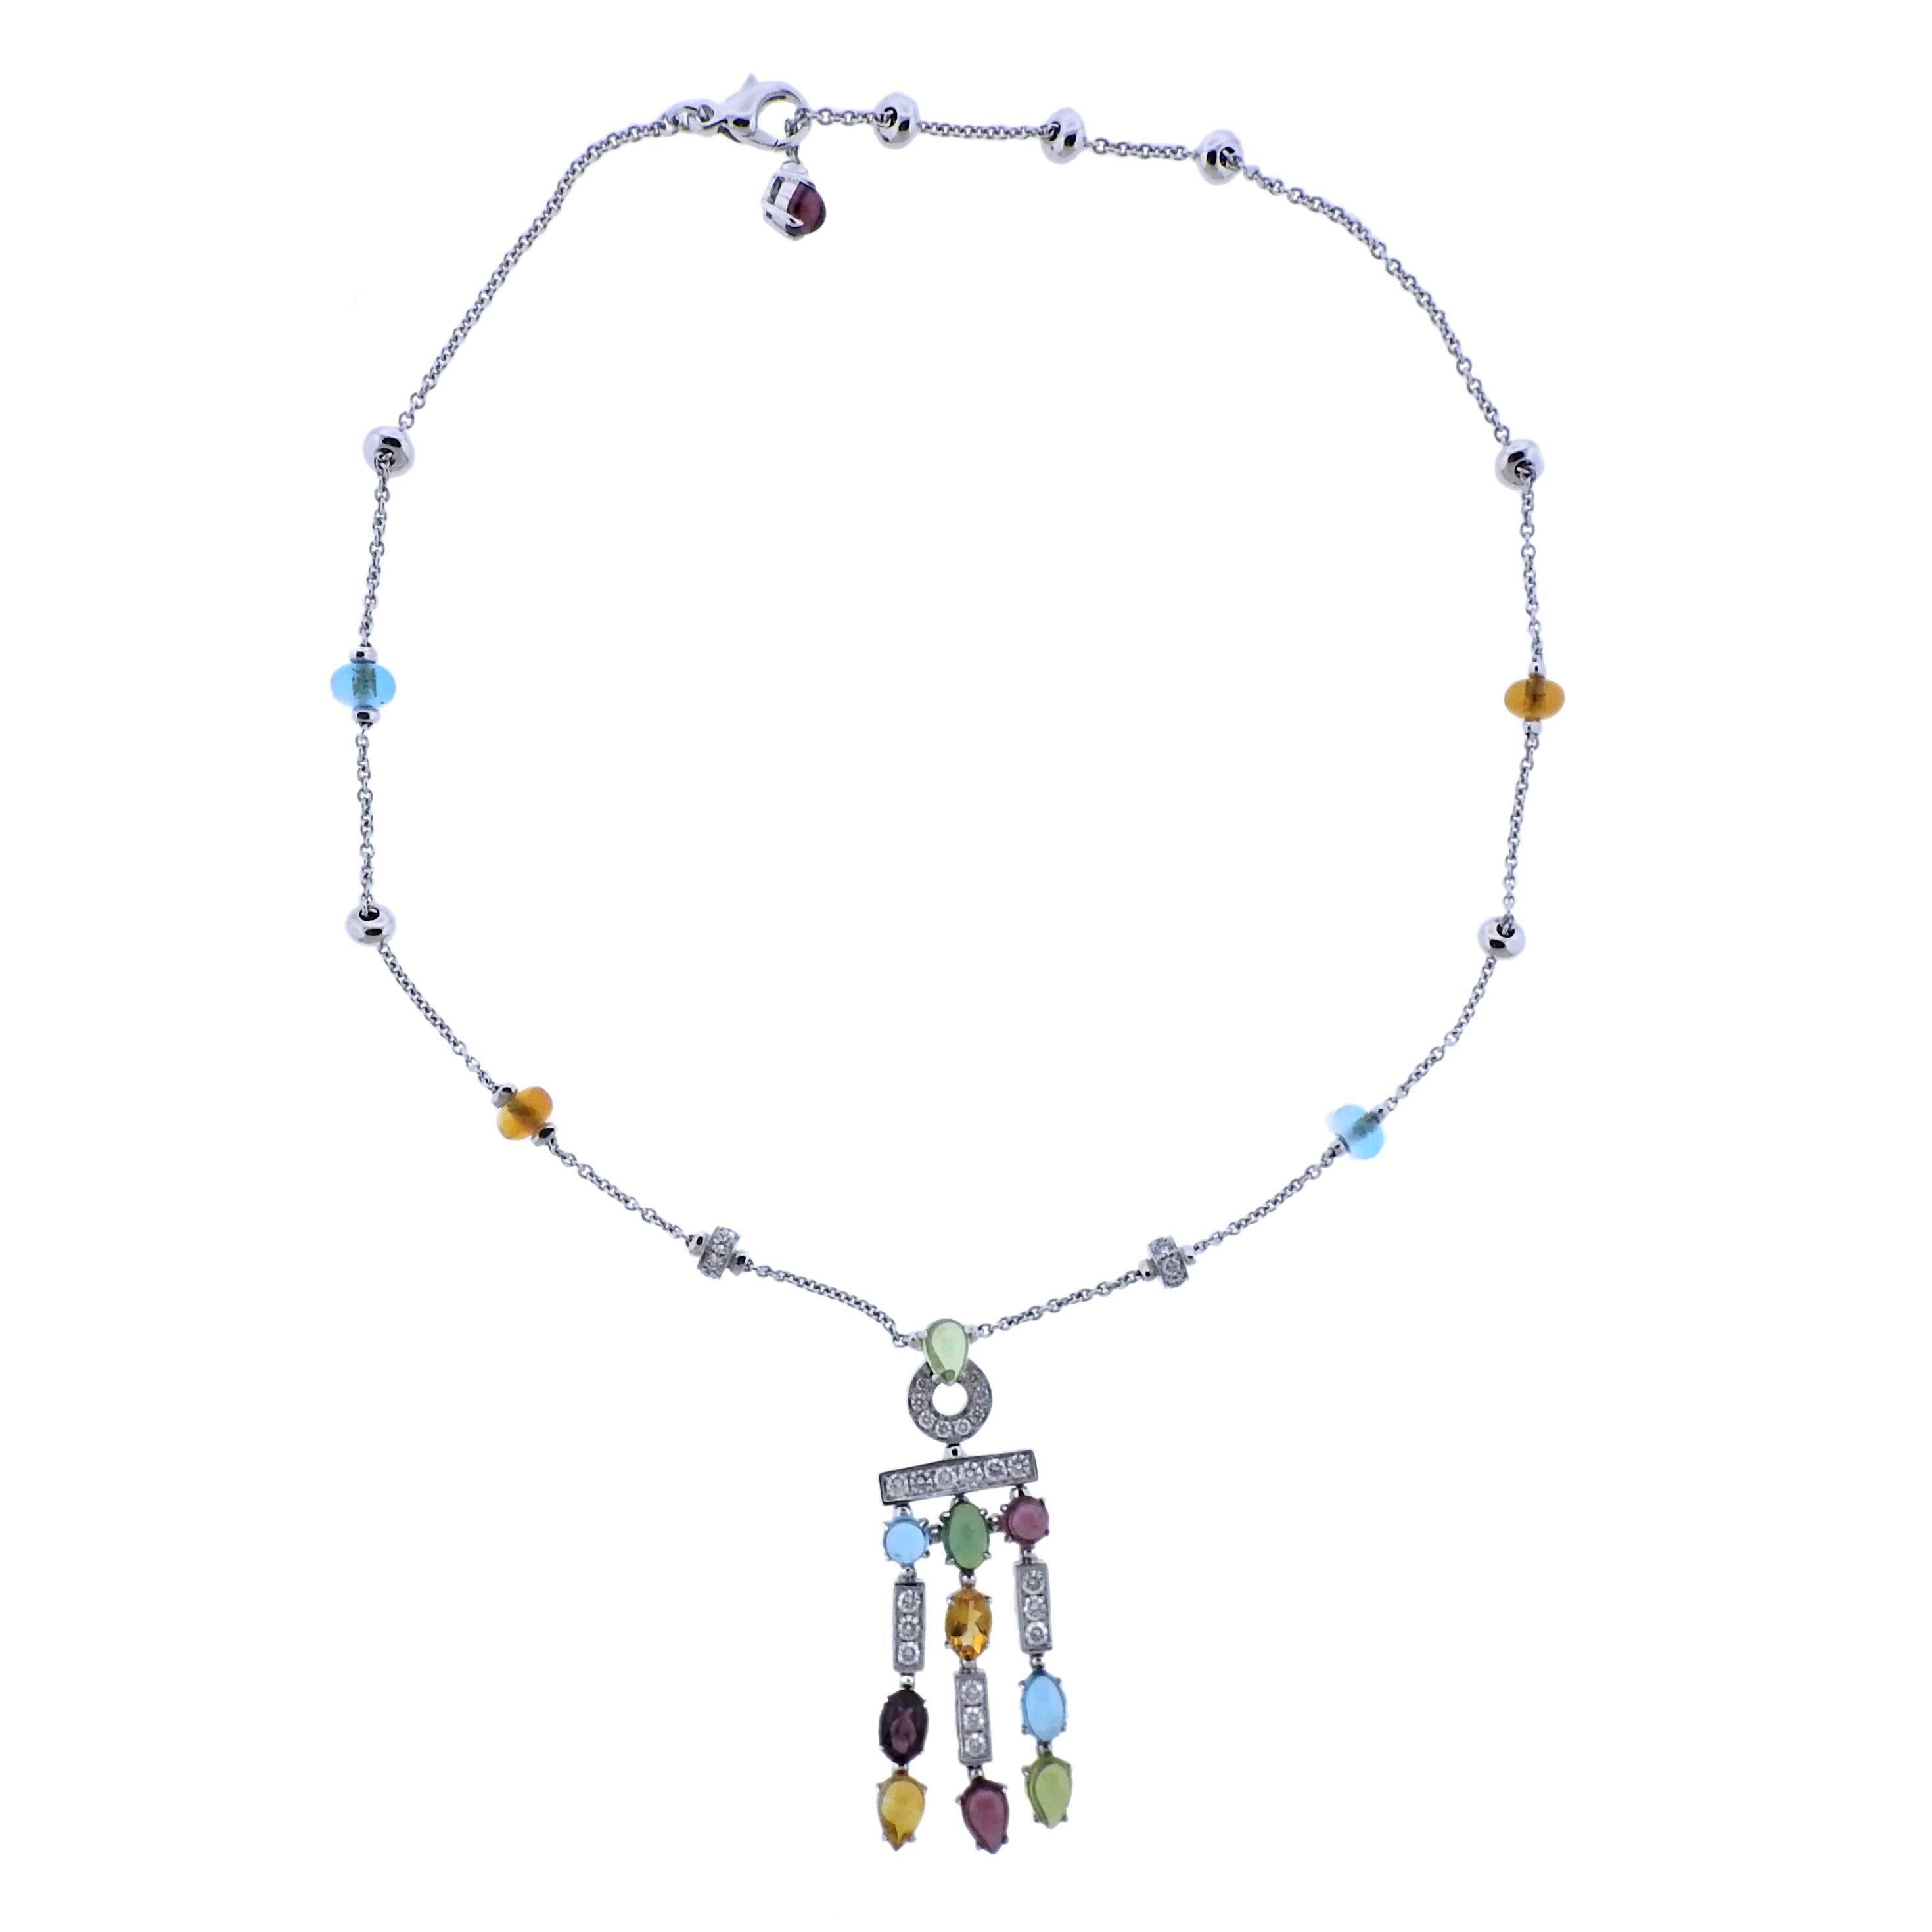 18k white gold pendant necklace by Bulgari from Allegra collection, adorned with multi color semi precious gemstones and approx. 1.40ctw in diamonds. Retail $25000. Necklace measures 17